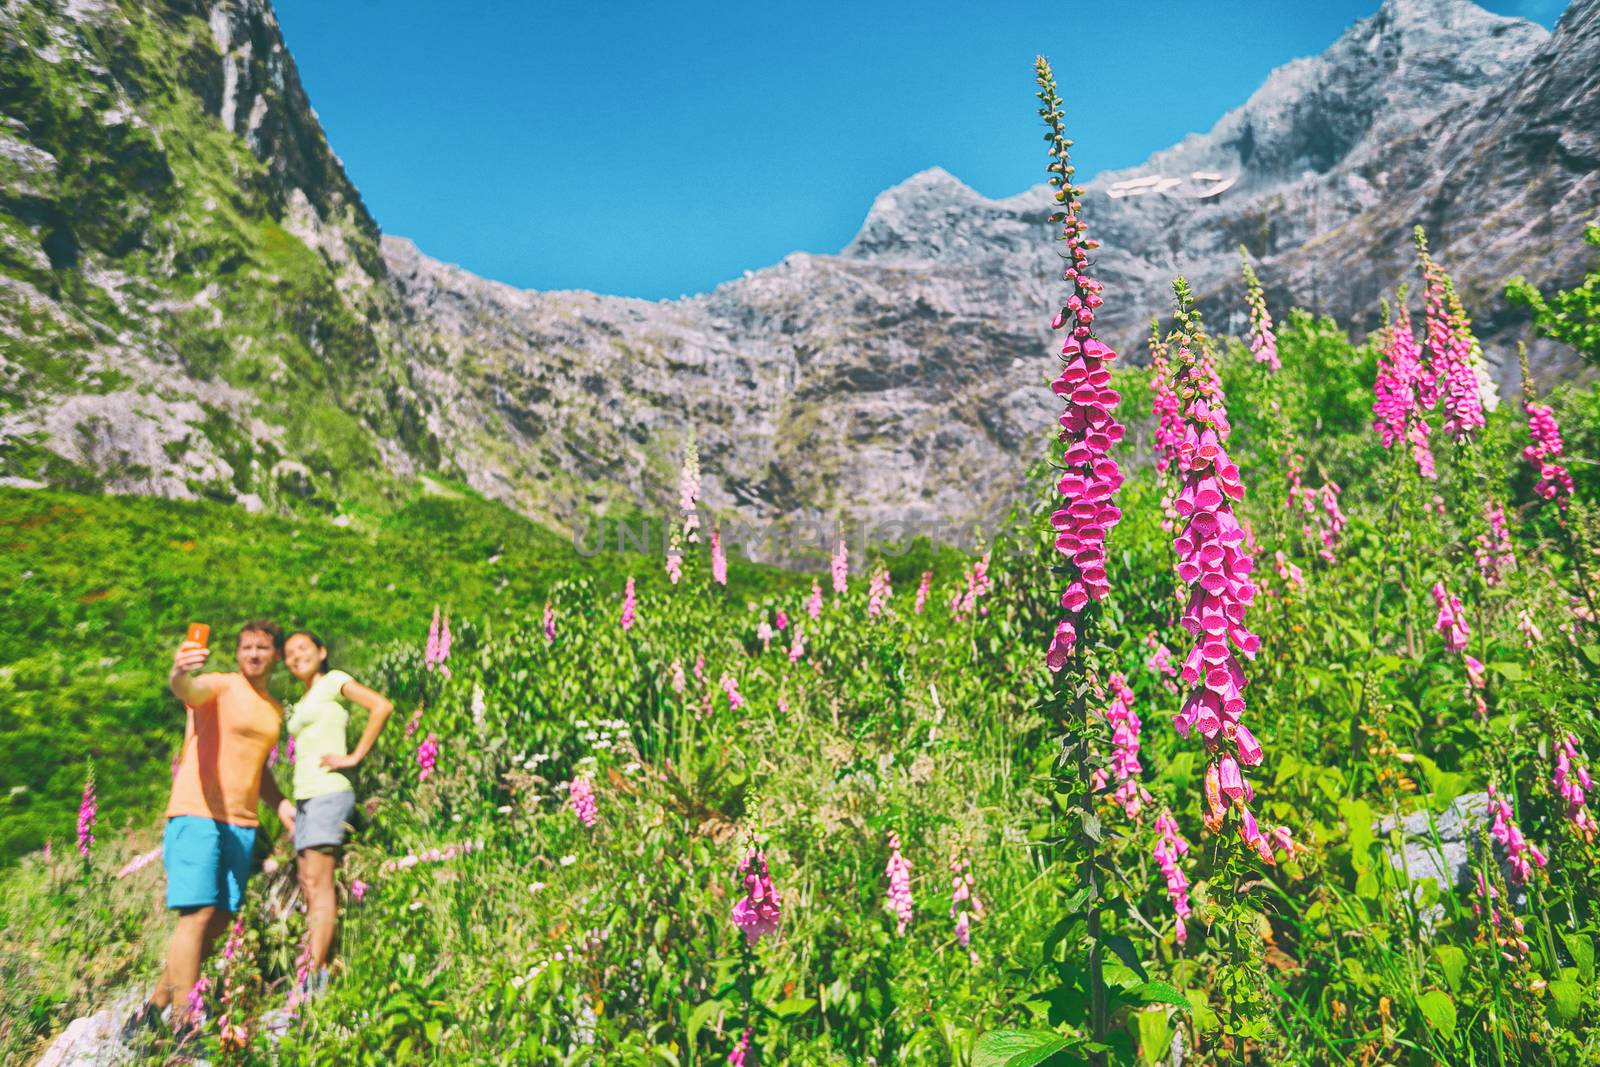 New Zealand trampers tourists taking selfie photo with camera phone in lupins flowers mountains background on summer road trip. Happy camping couple walking in nature taking pictures in New Zealand by Maridav